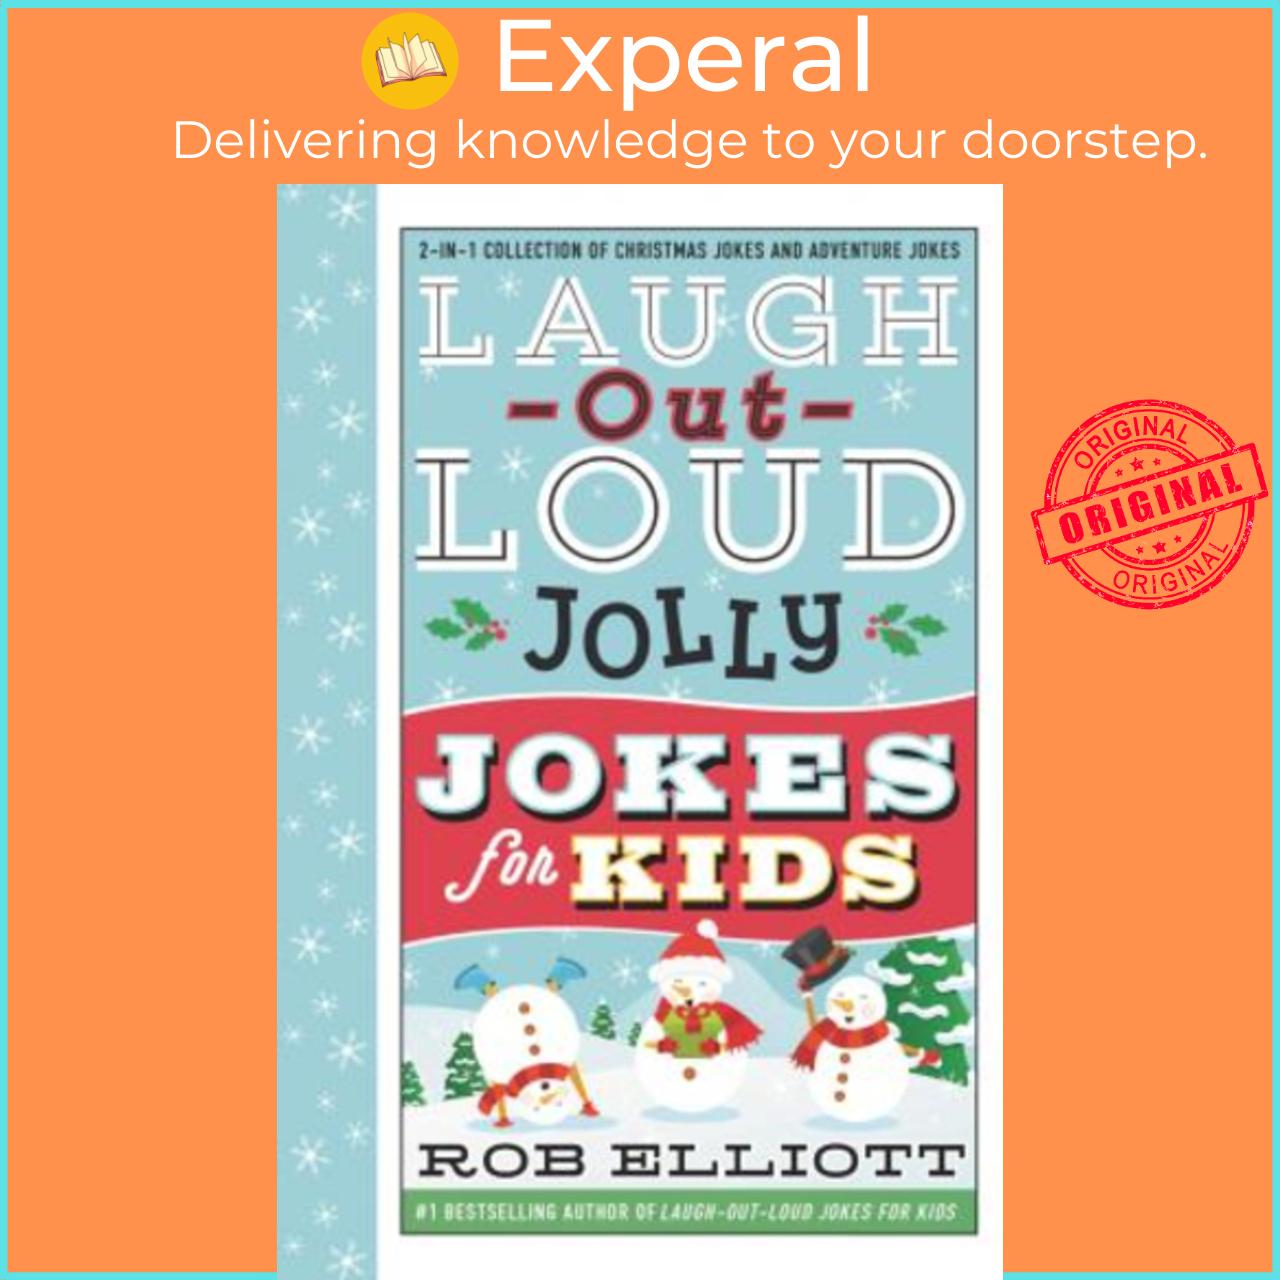 Sách - Laugh-Out-Loud Jolly Jokes for Kids : 2-in-1 Collection of Christmas Jokes by Rob Elliott (US edition, hardcover)